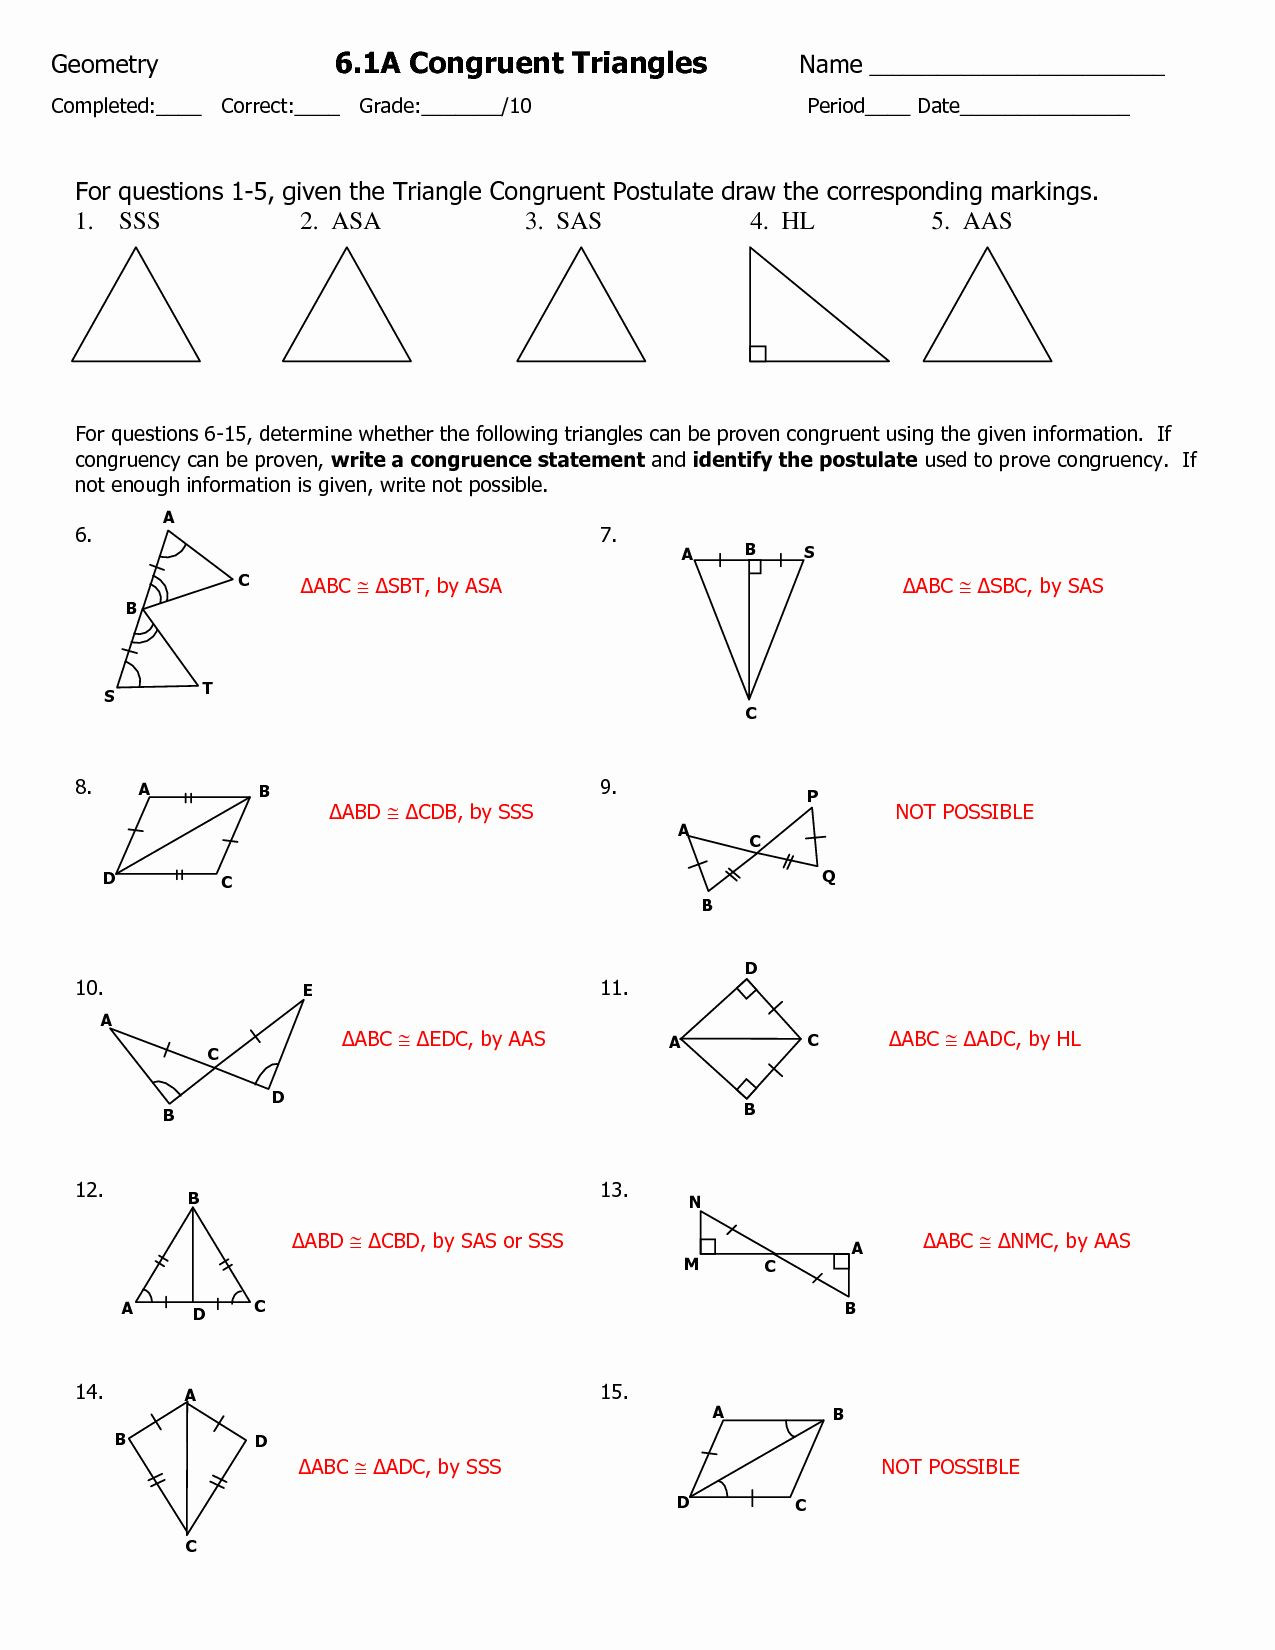 Proving Triangles Congruent Worksheet Answers 50 Congruent Triangles Worksheet with Answer In 2020 with